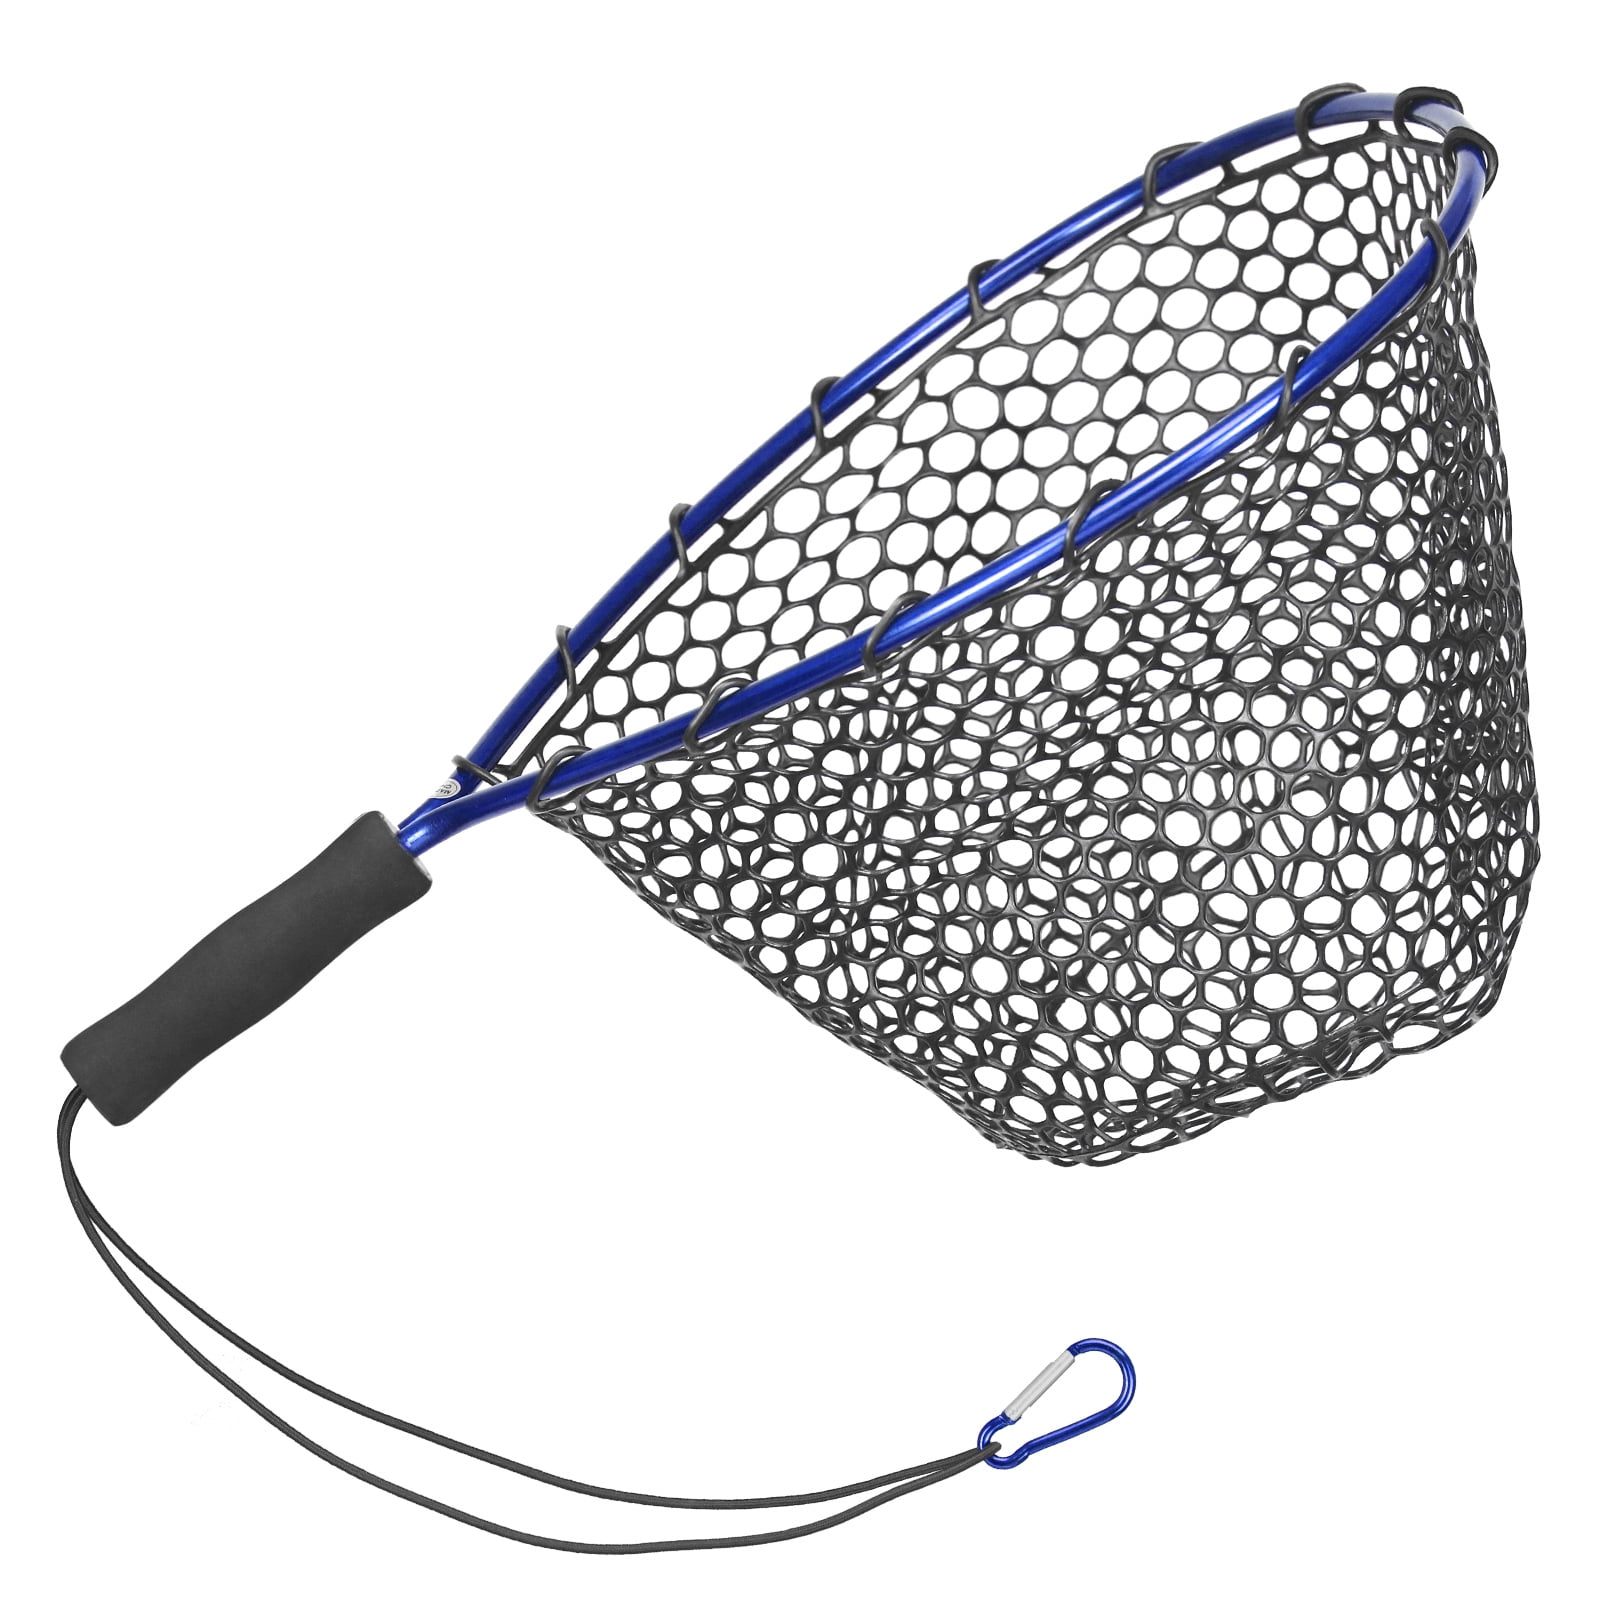 Fishing Net Soft Silicone Fish Landing Net Aluminium Alloy Pole EVA Handle  with Elastic Strap and Carabiner Fishing Nets Tools Accessories for  Catching Fishes 